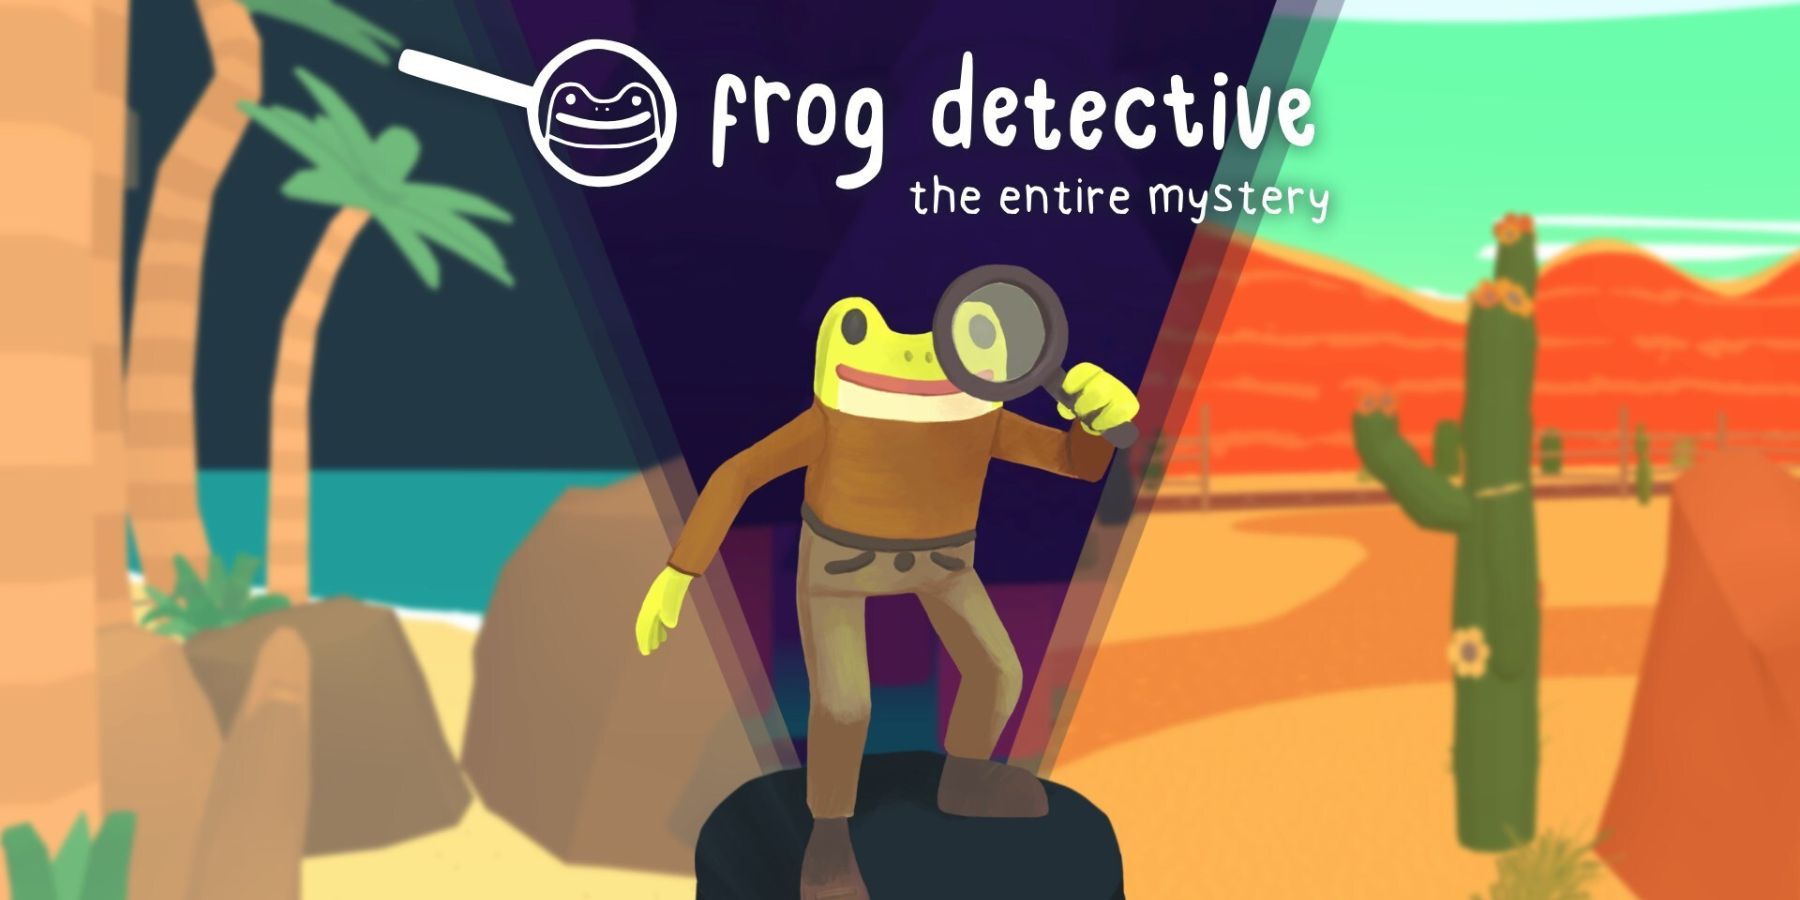 frog detective the entire mystery cover art.